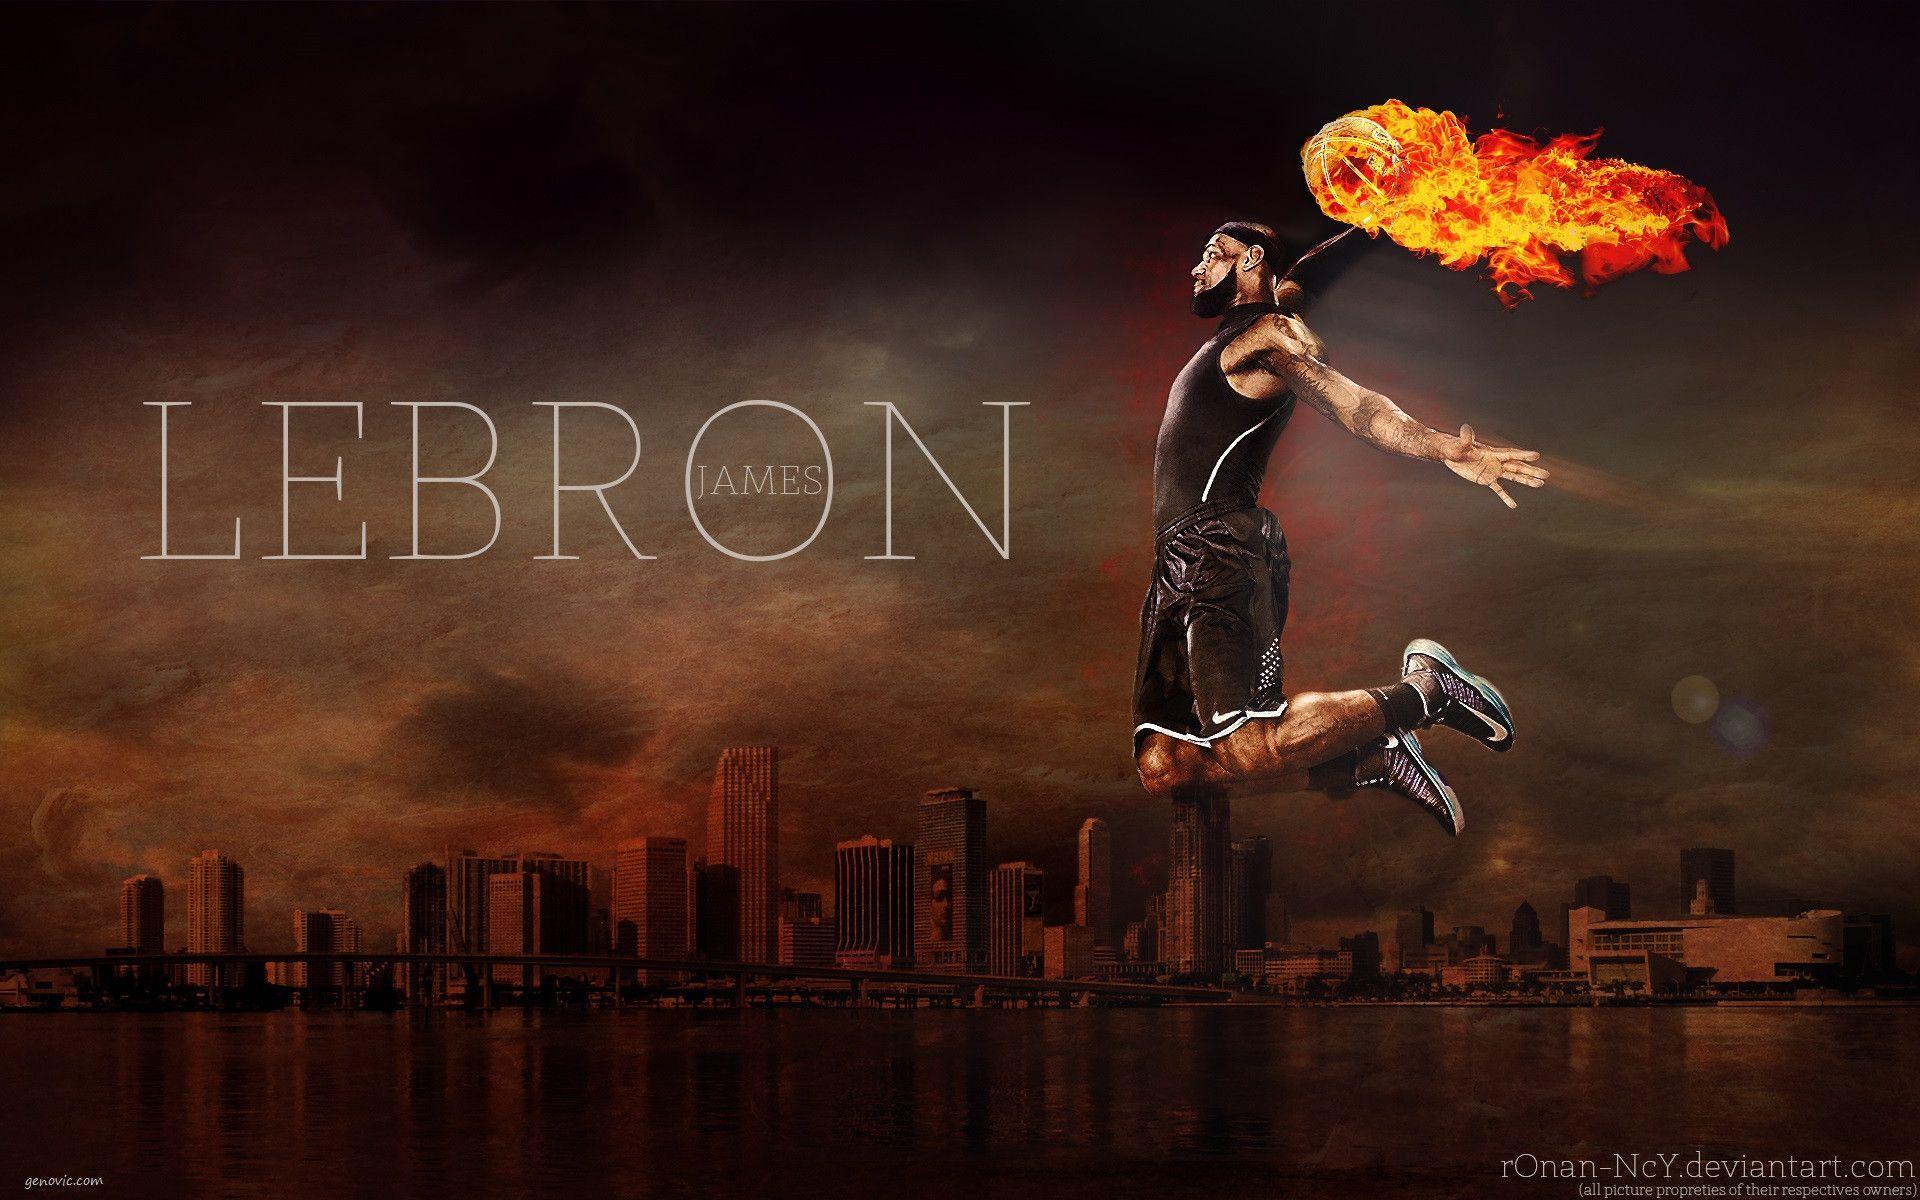 Dunks of Lebron James Wallpapers, Download Free HD Wallpapers